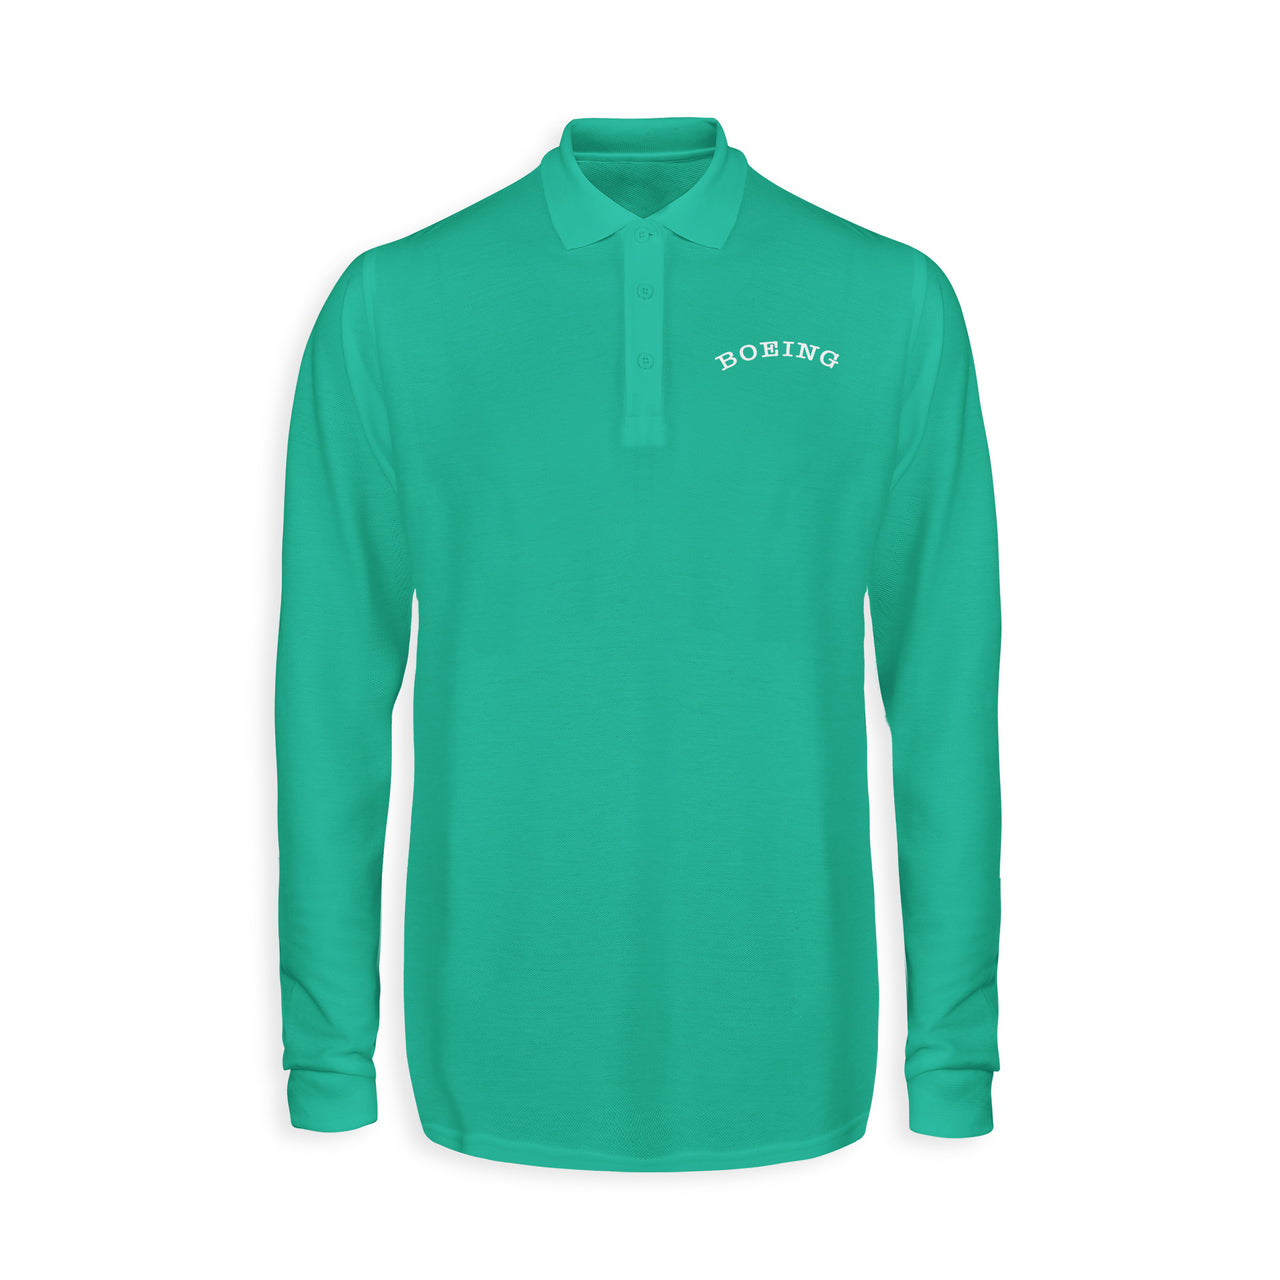 Special BOEING Text Designed Long Sleeve Polo T-Shirts